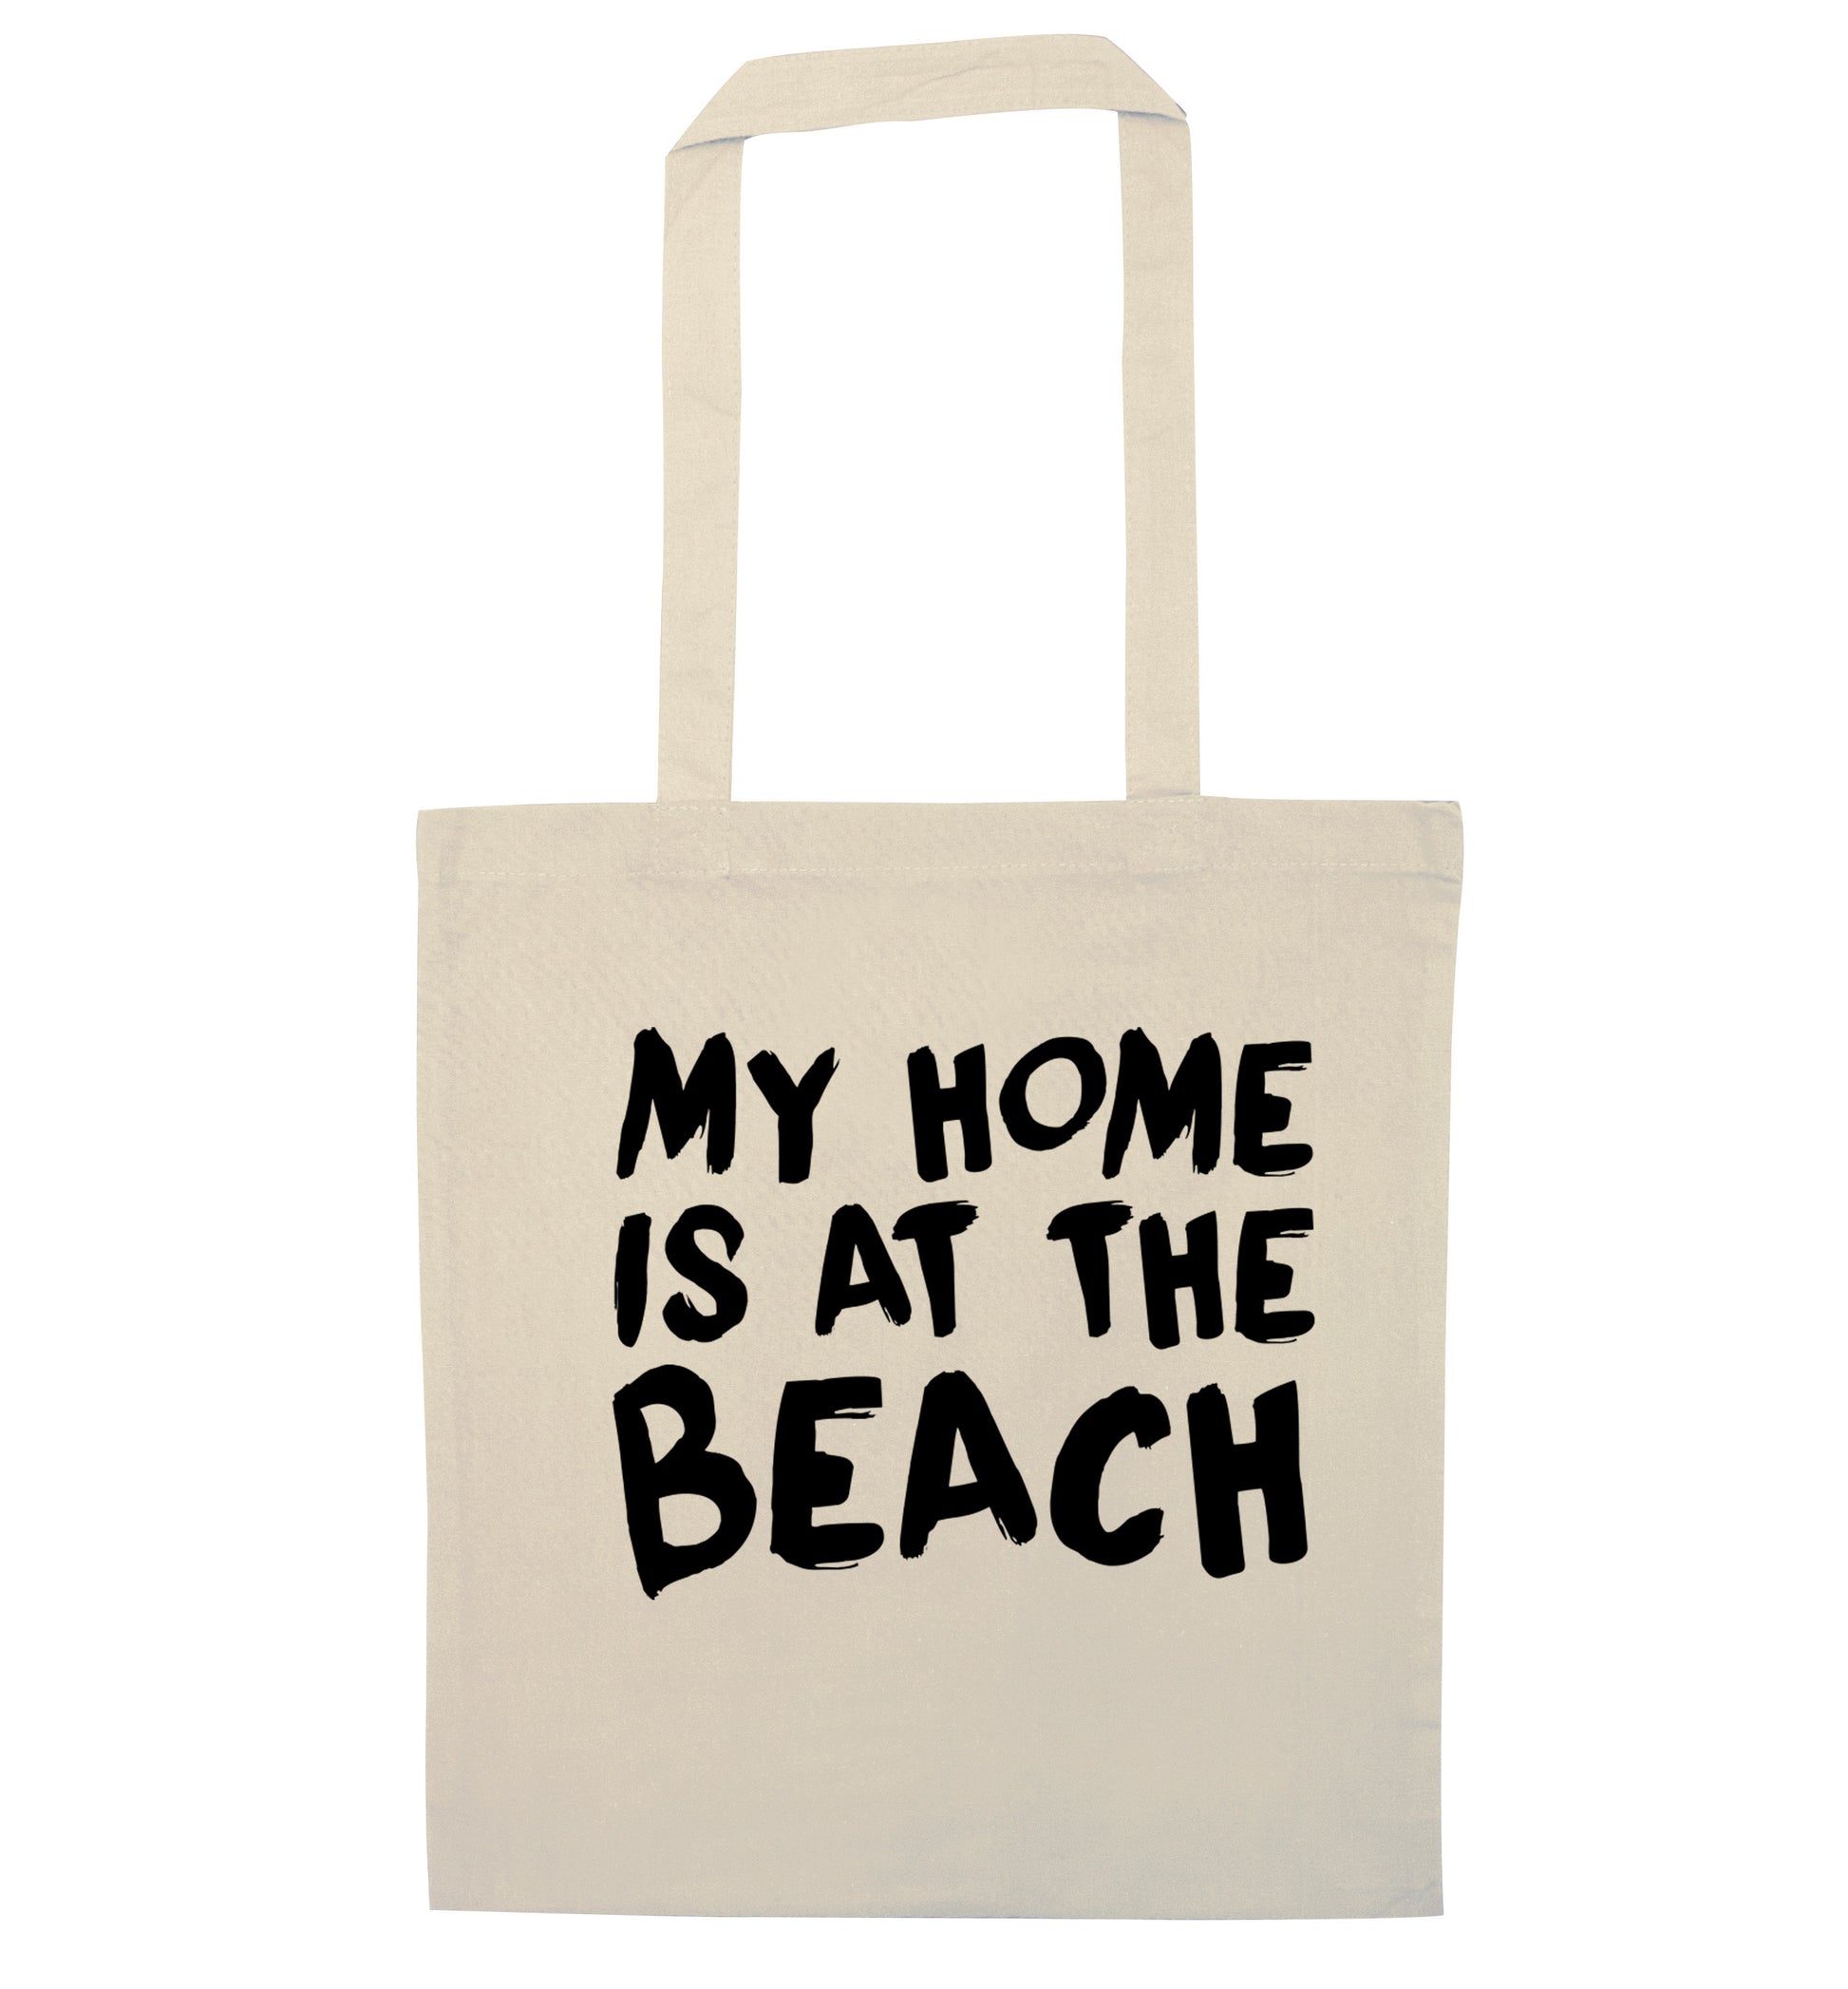 My home is at the beach natural tote bag